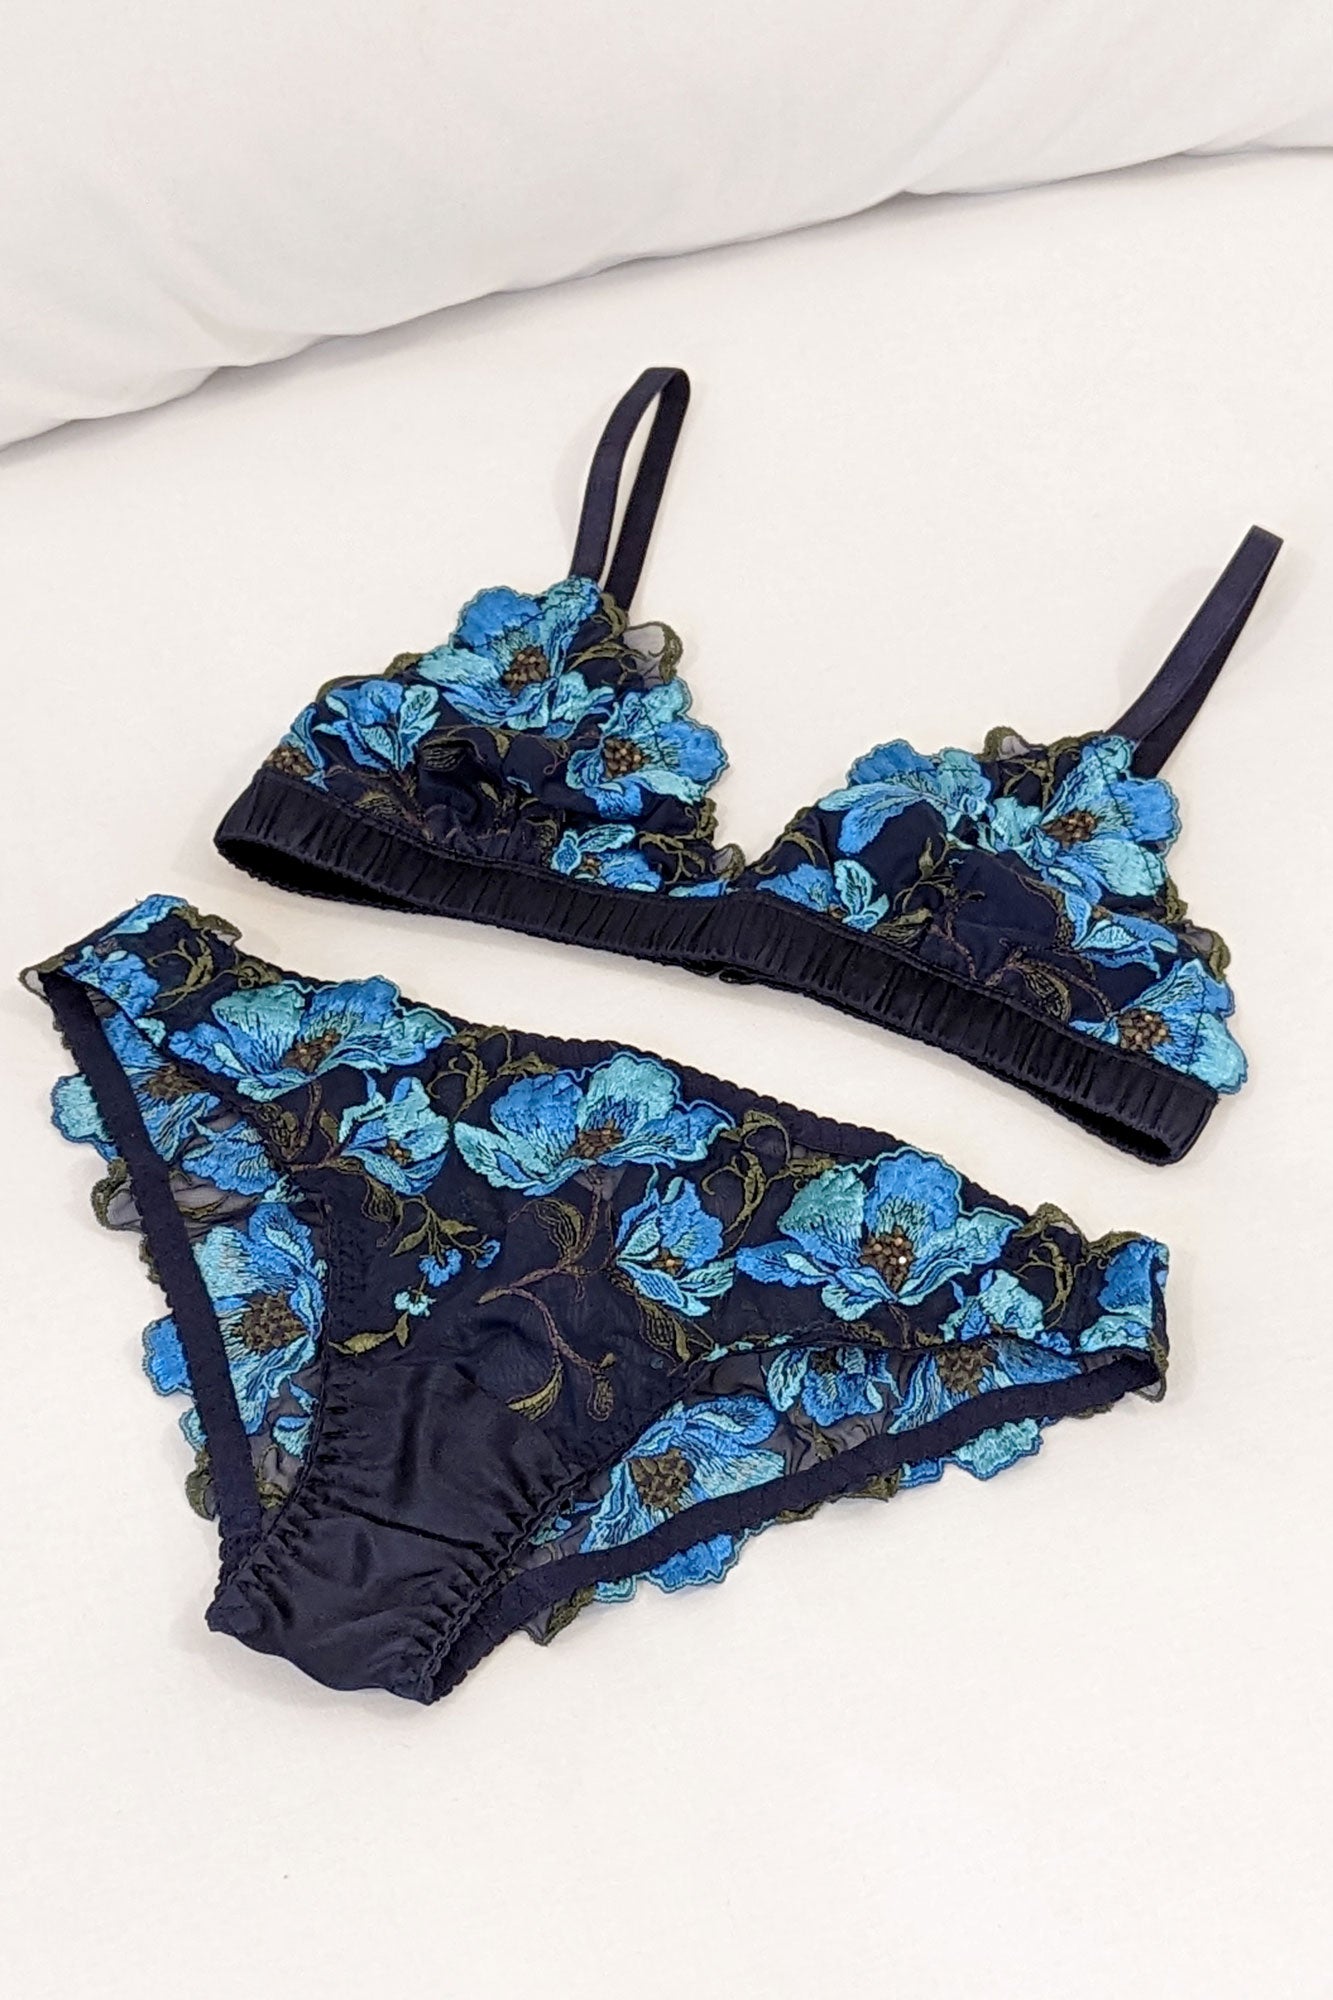 Handmade silk underwear set with an embroidered bralette and flower trimmed knickers